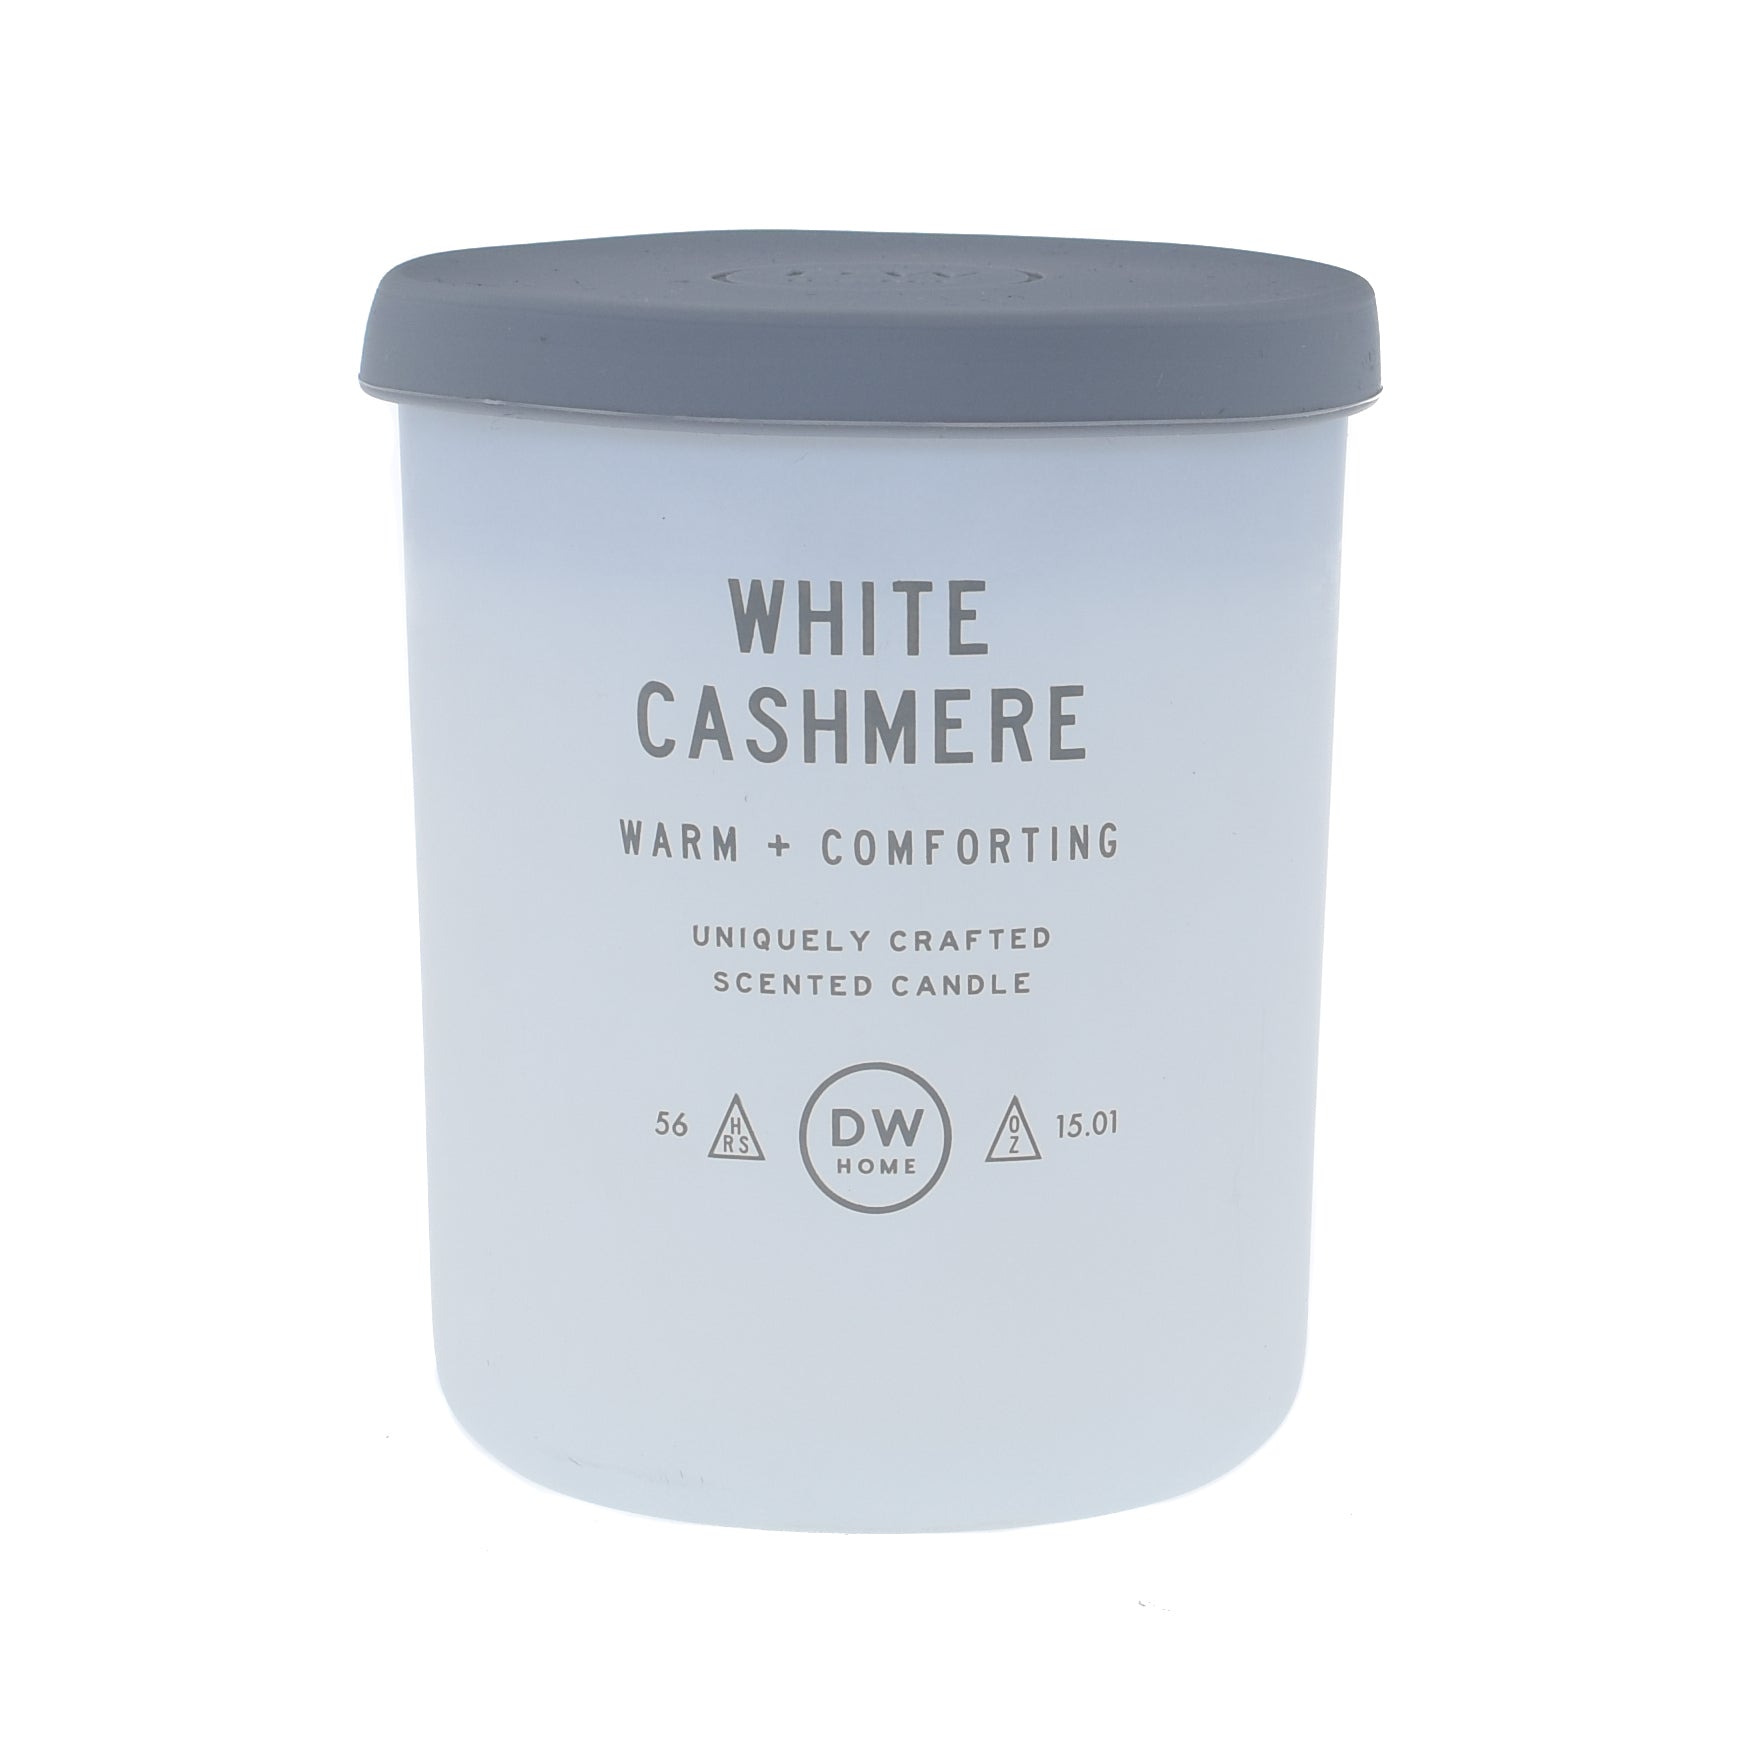  WHITE CASHMERE WARM COMFORTING UNIQUELY CRAFTED SCENTED CANDLE 55 Ao 